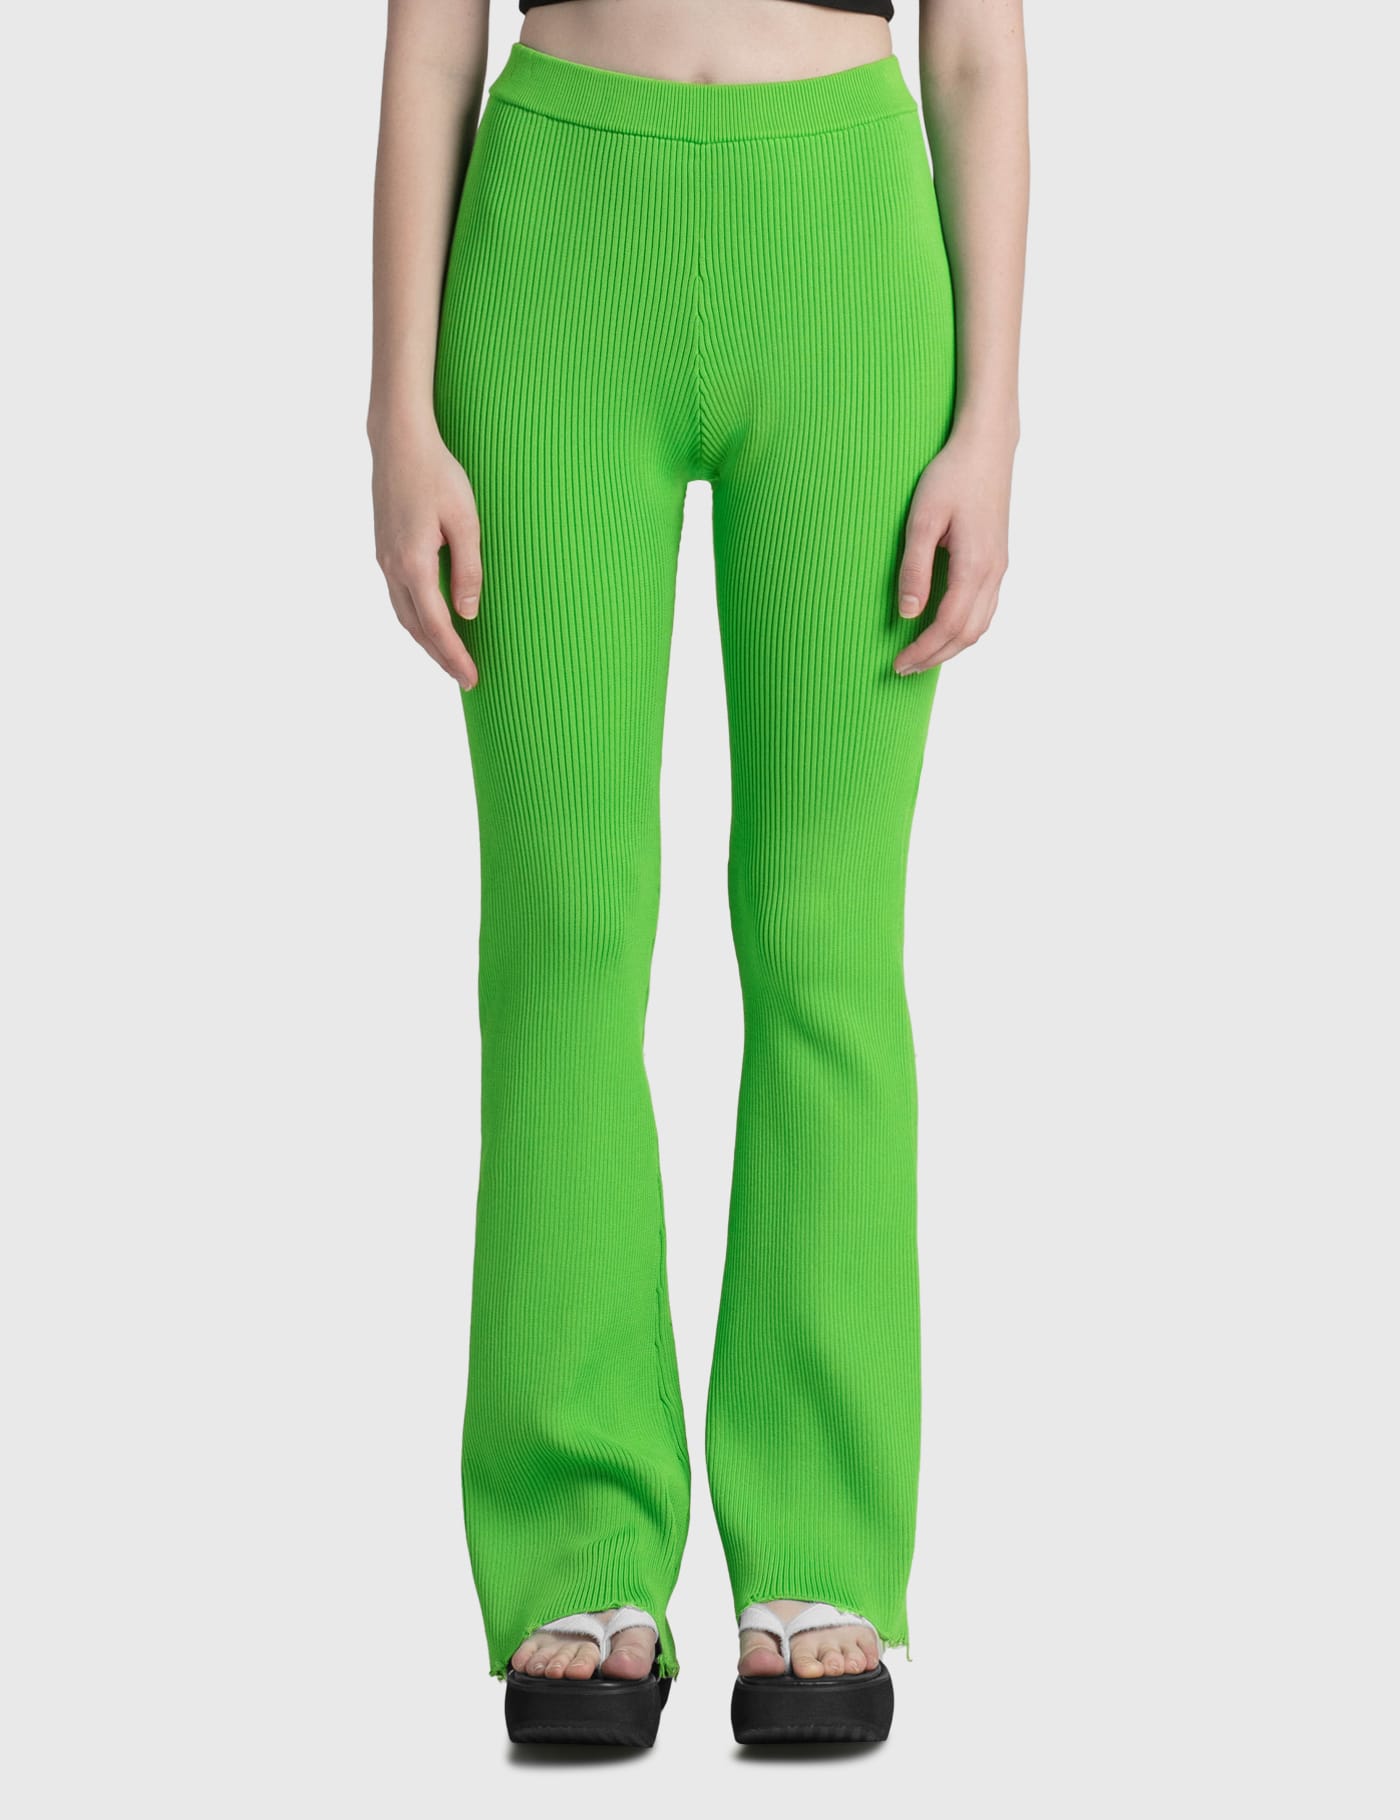 Perverze - Cotton Rib Line Pants | HBX - Globally Curated Fashion 